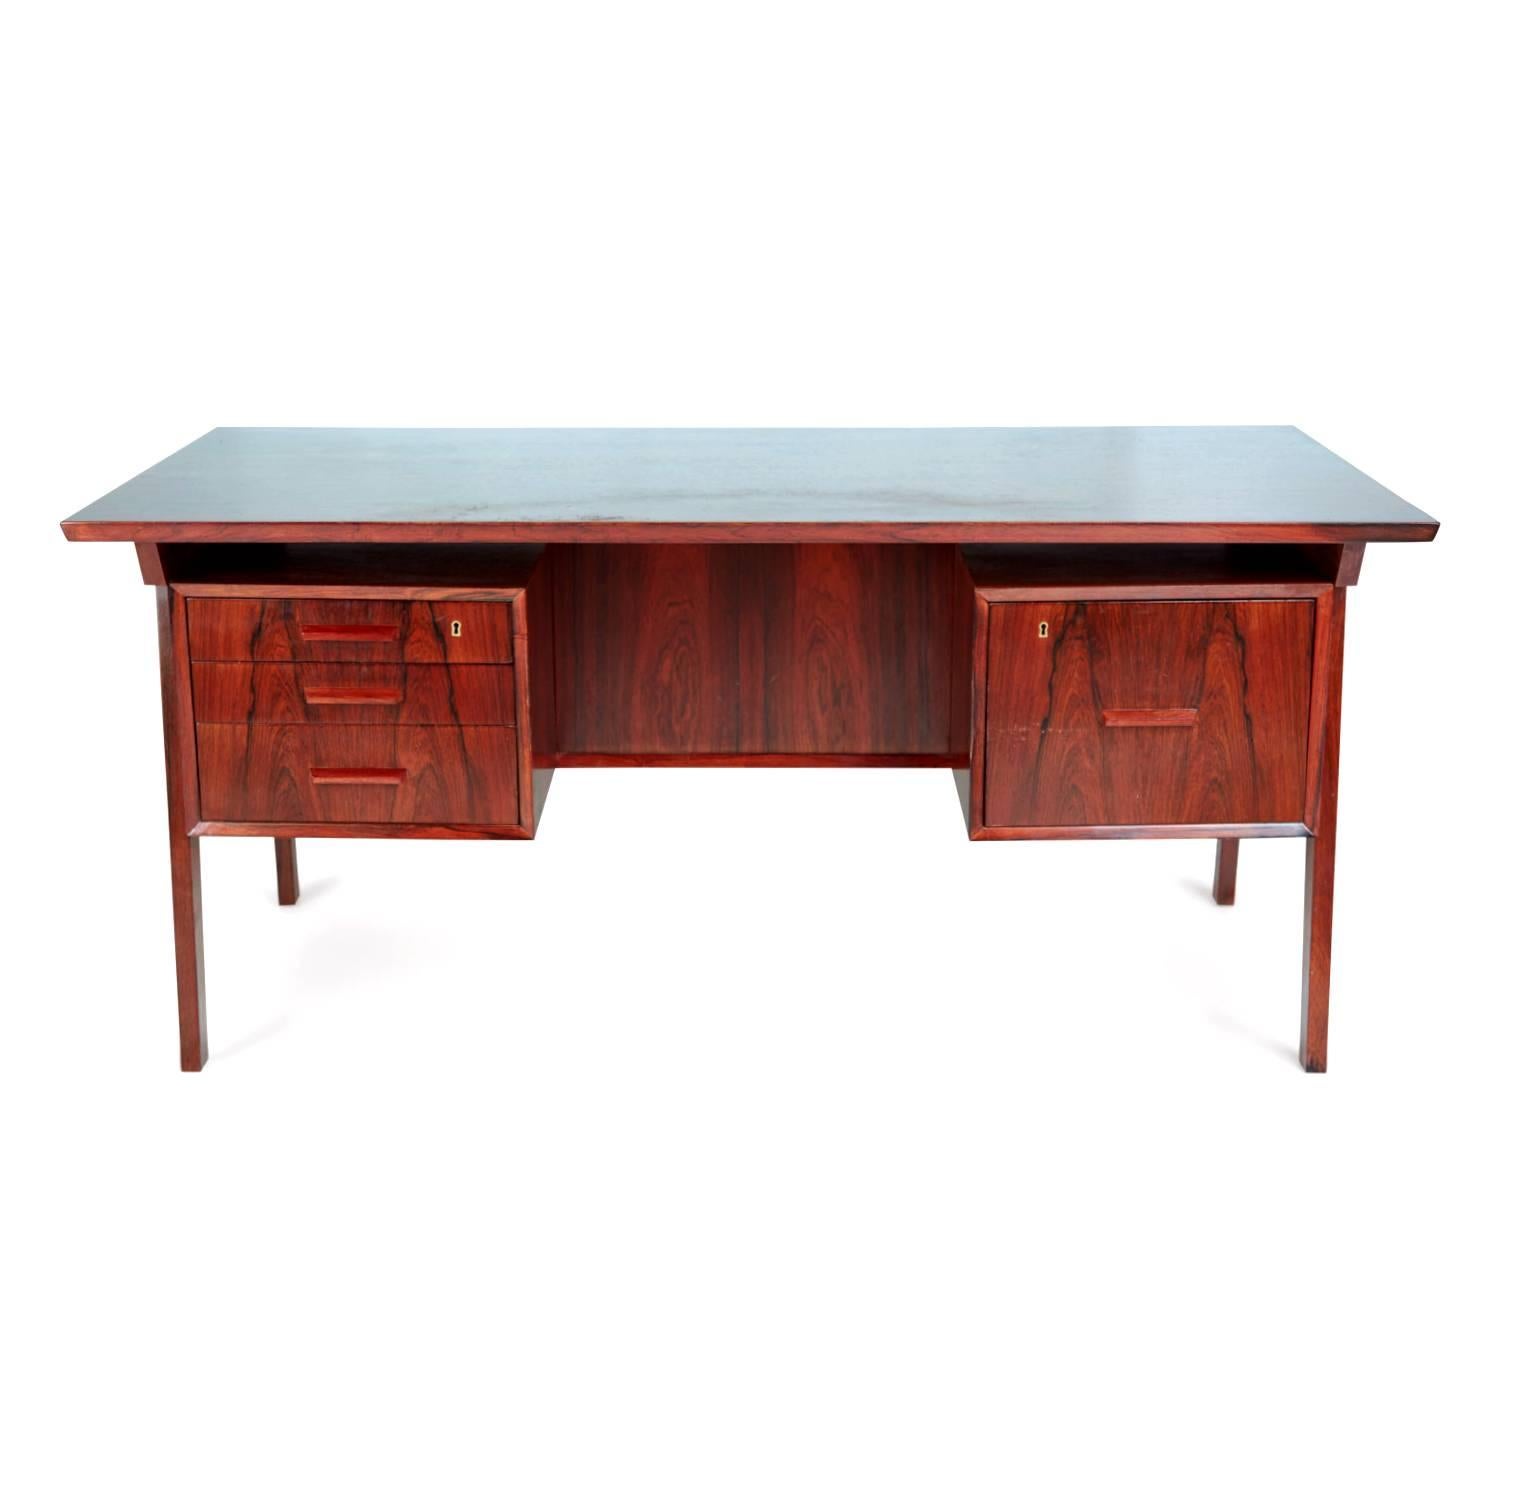 Gorgeous desk that has been expertly crafted from rosewood with a stunning grain. This desk features a broad Brazilian rosewood top with three paper drawers on one side, of which the top is lockable, and one file drawer on the right, also lockable.